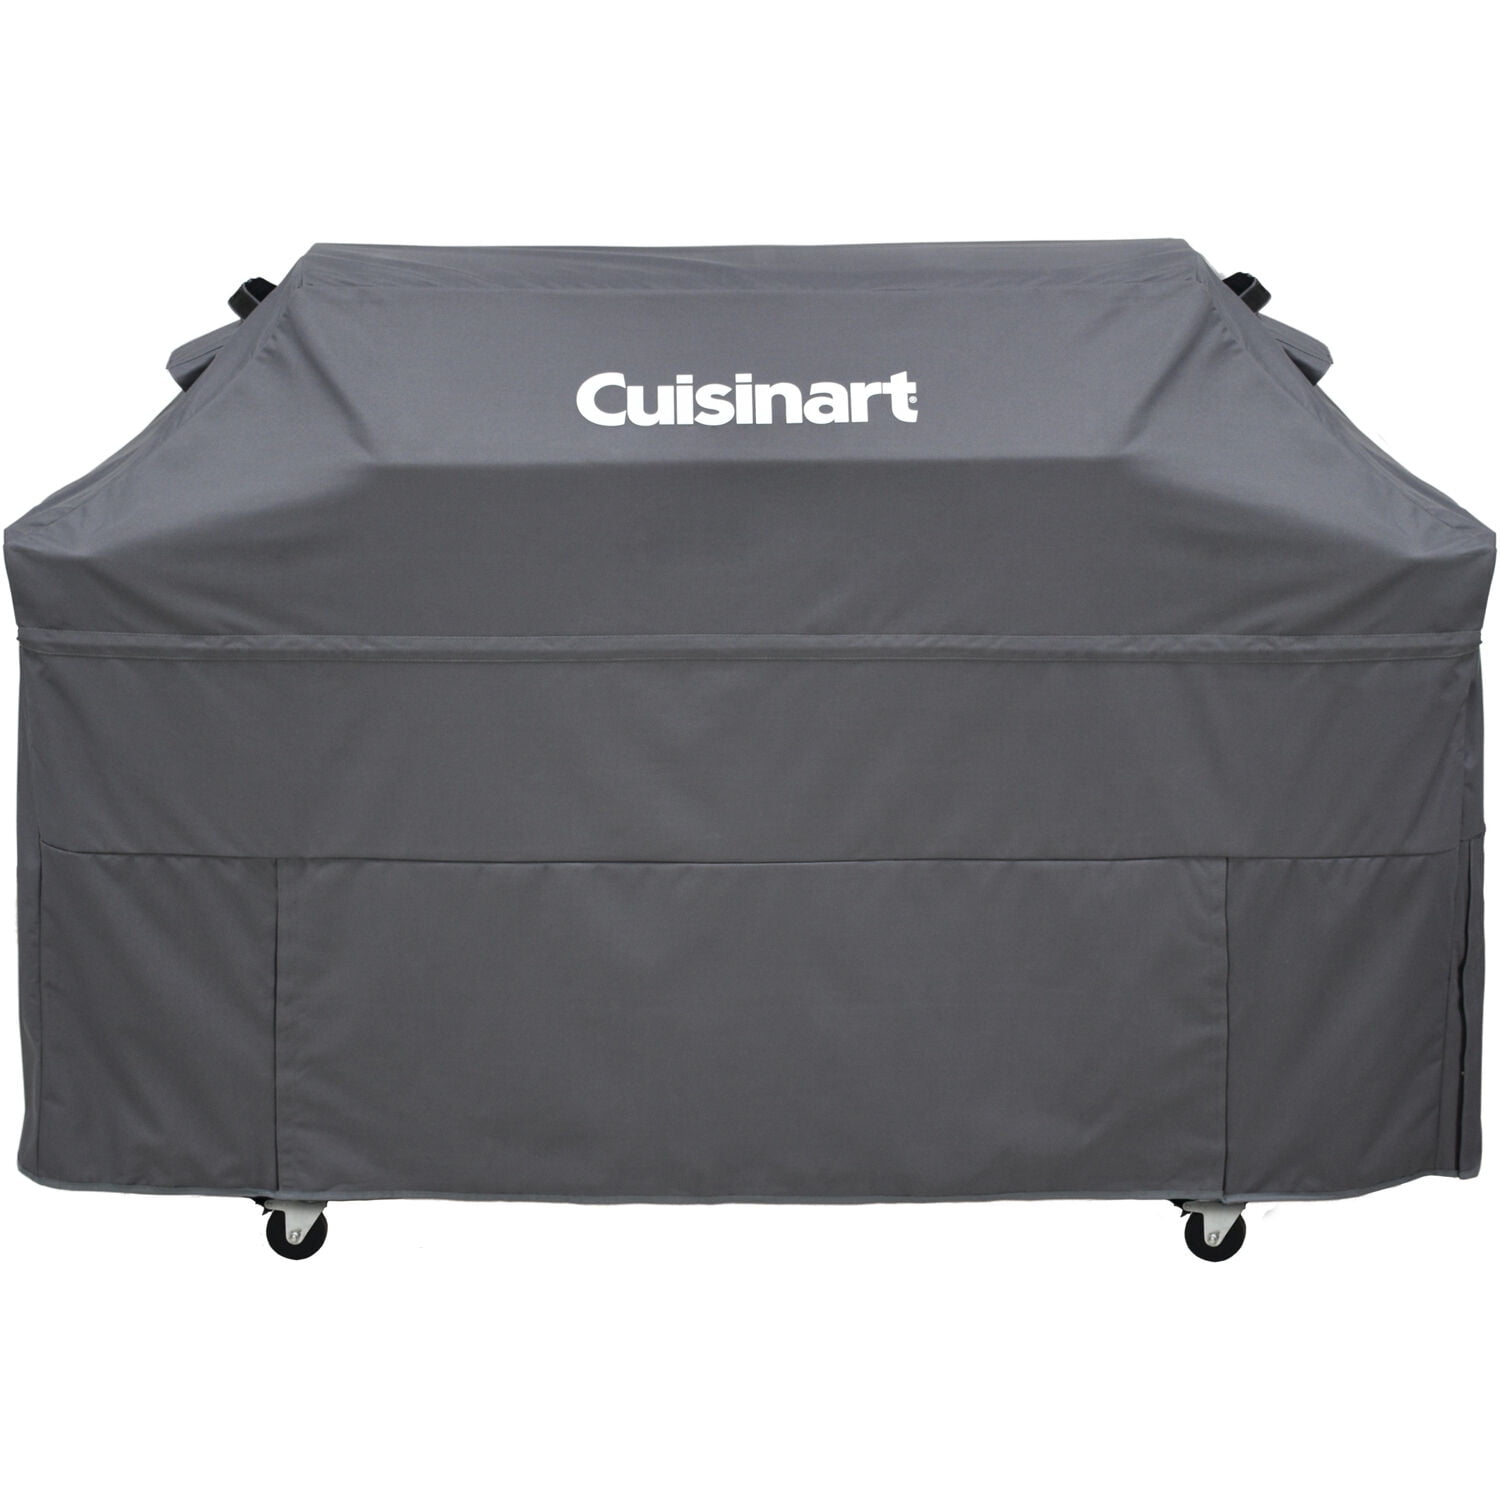 Cuisinart BBQ Gray 4-5 Burner Gas Grill Cover UV Protected Wind Water Resistant 